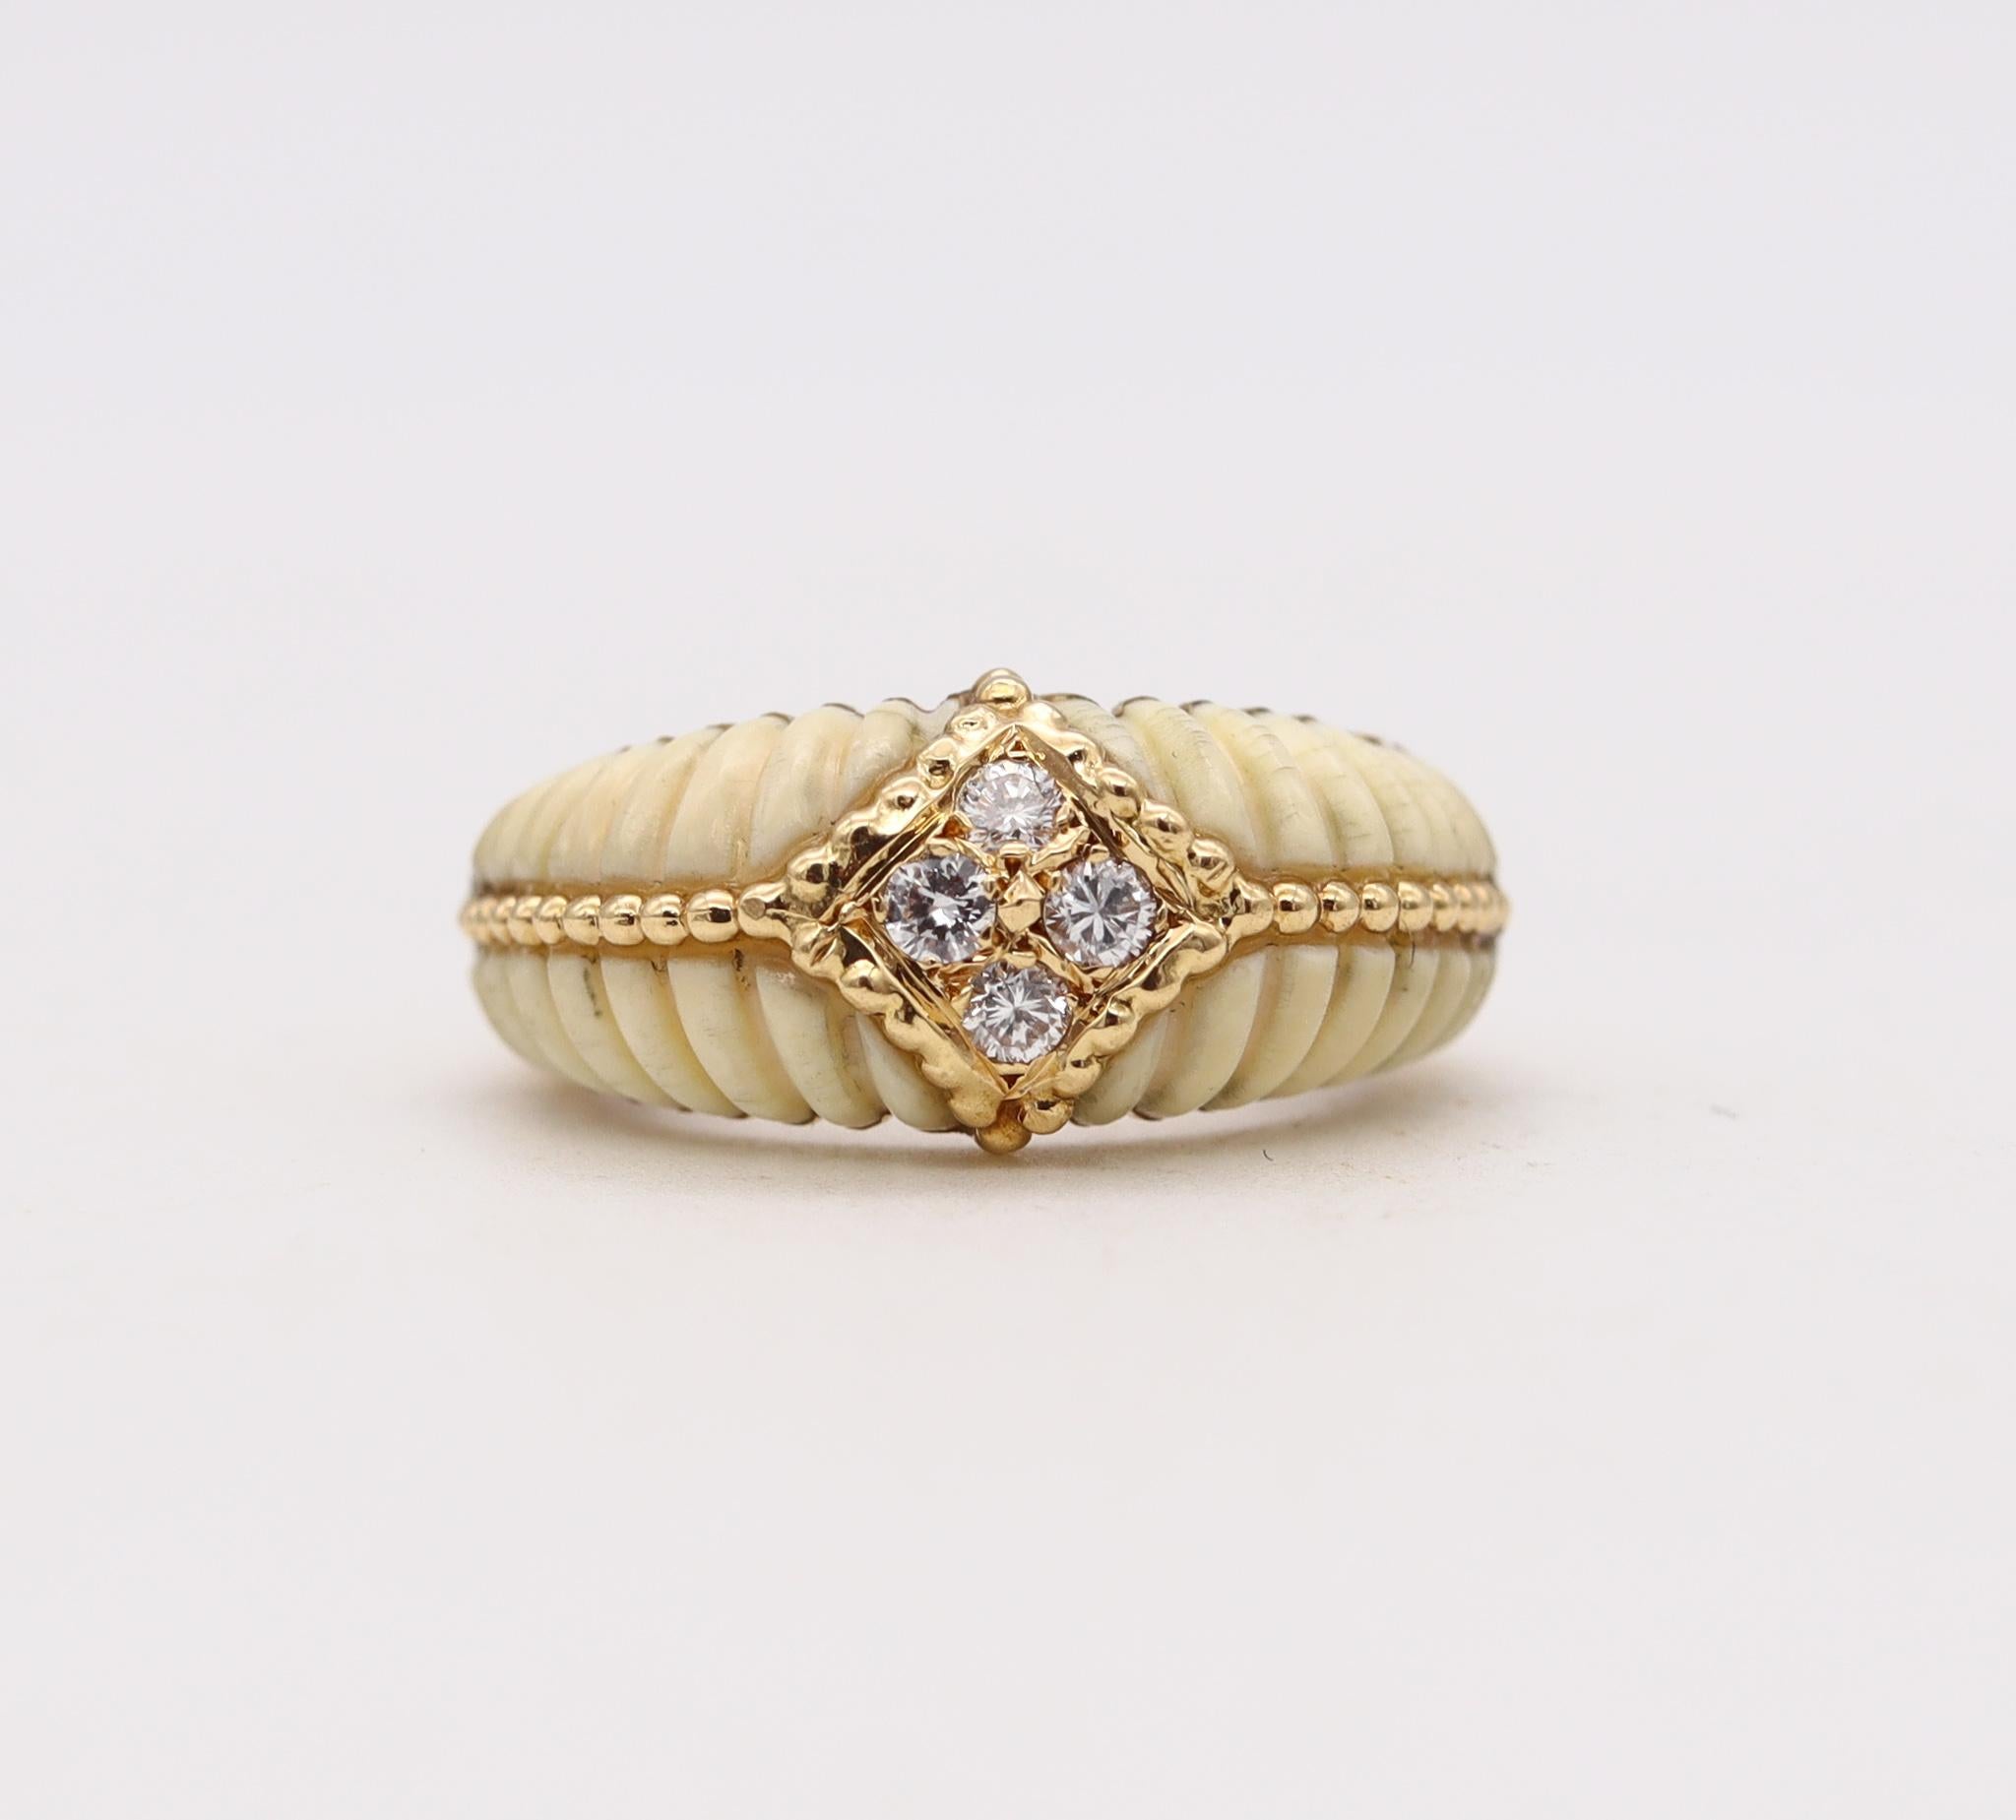 Modernist Van Cleef & Arpels 1970 Paris Ring in 18Kt Gold with VS Diamonds and White Coral